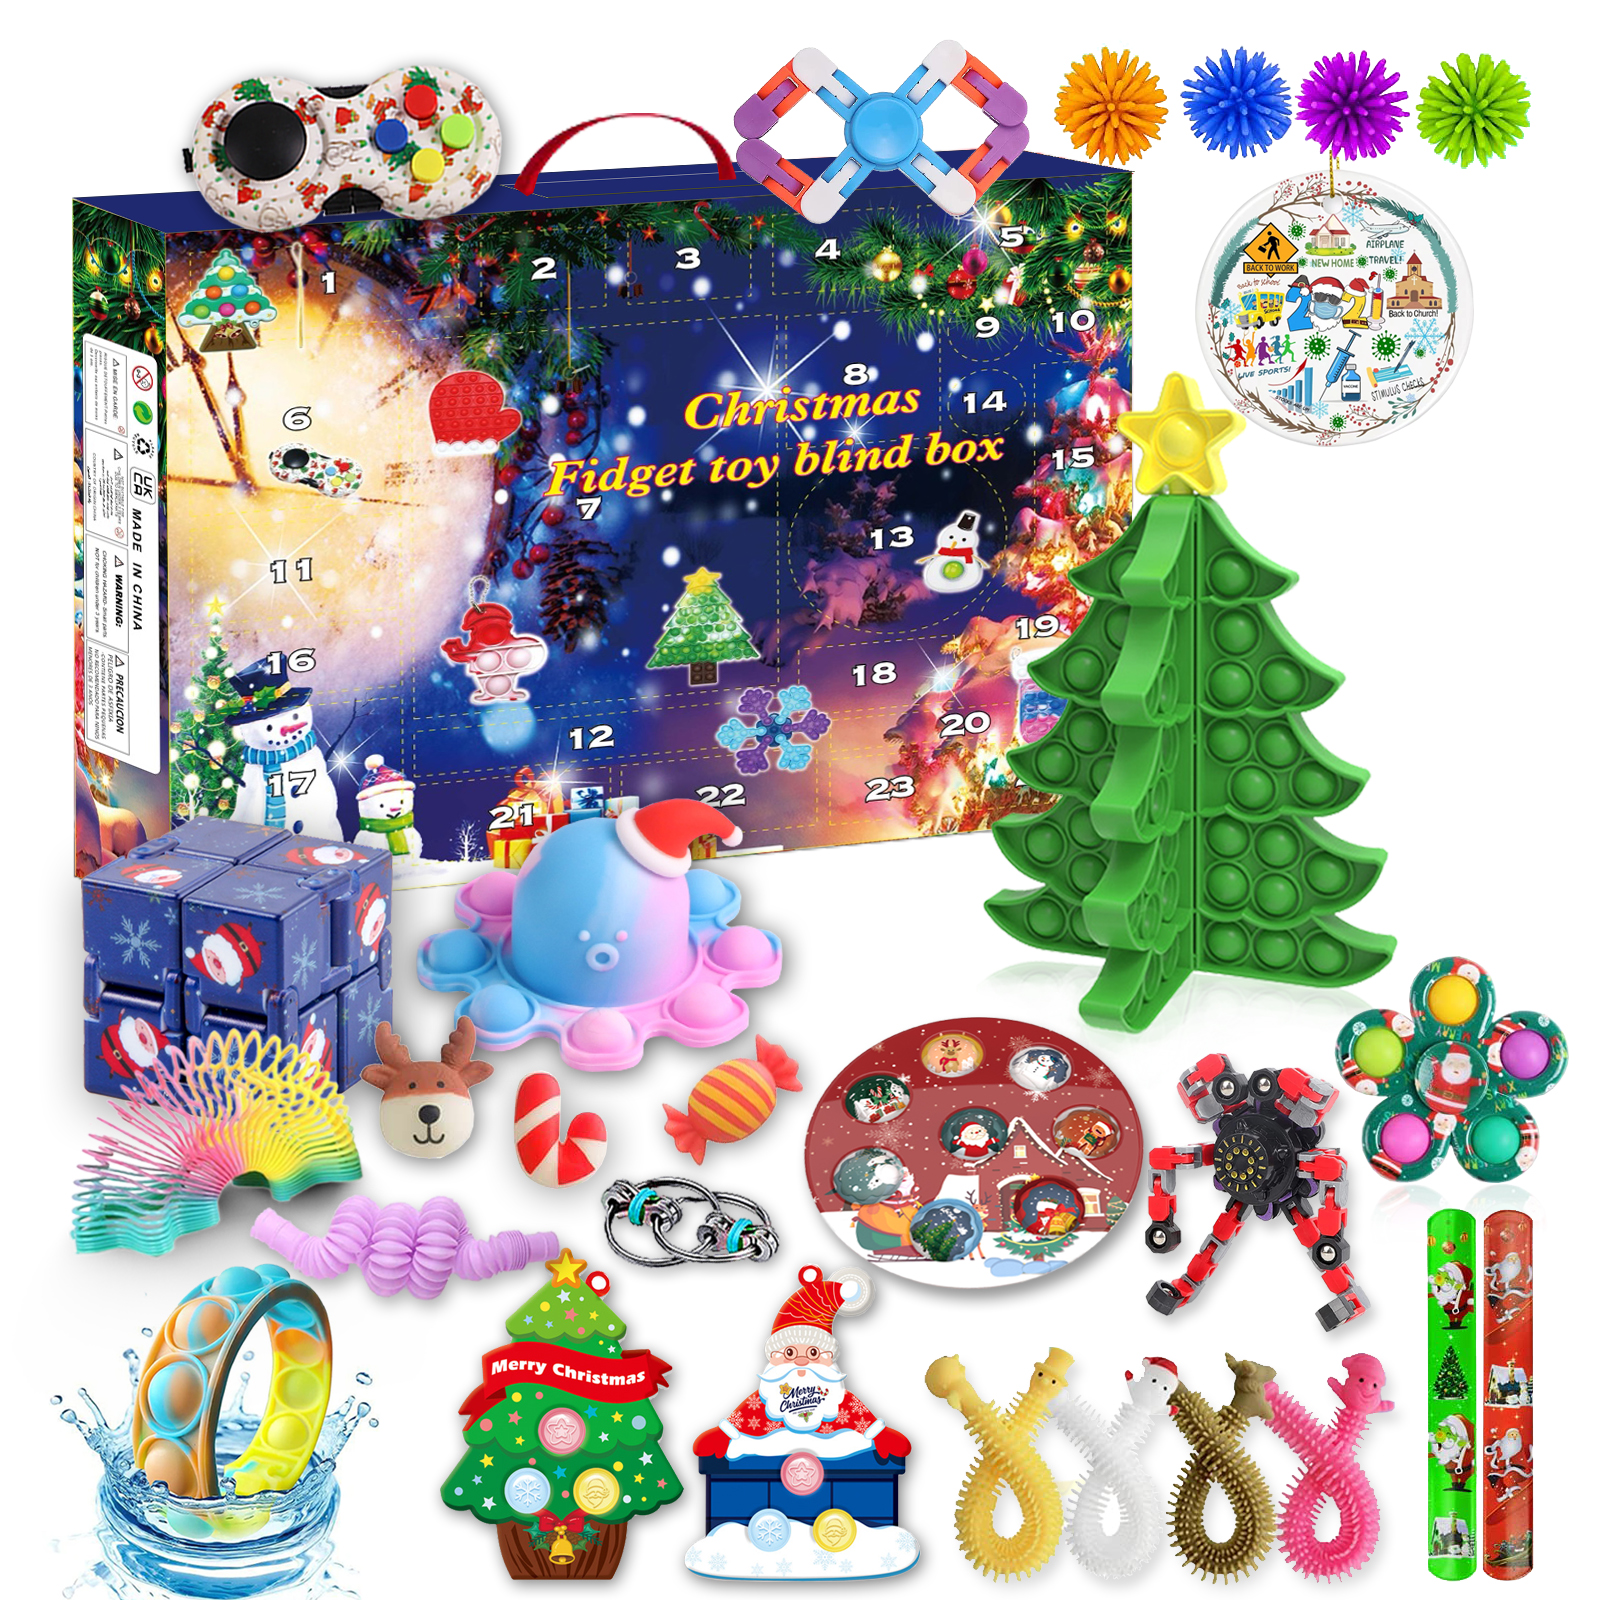  Fidget Advent Calendars for Kids, Christmas Advent Calendars  2023 Countdown 24 Days, Bubble Toy Surprise Box Christmas Advent Calendar  Sensory Fidget Toy Packs, Surprise Gifts for Girls : Home & Kitchen